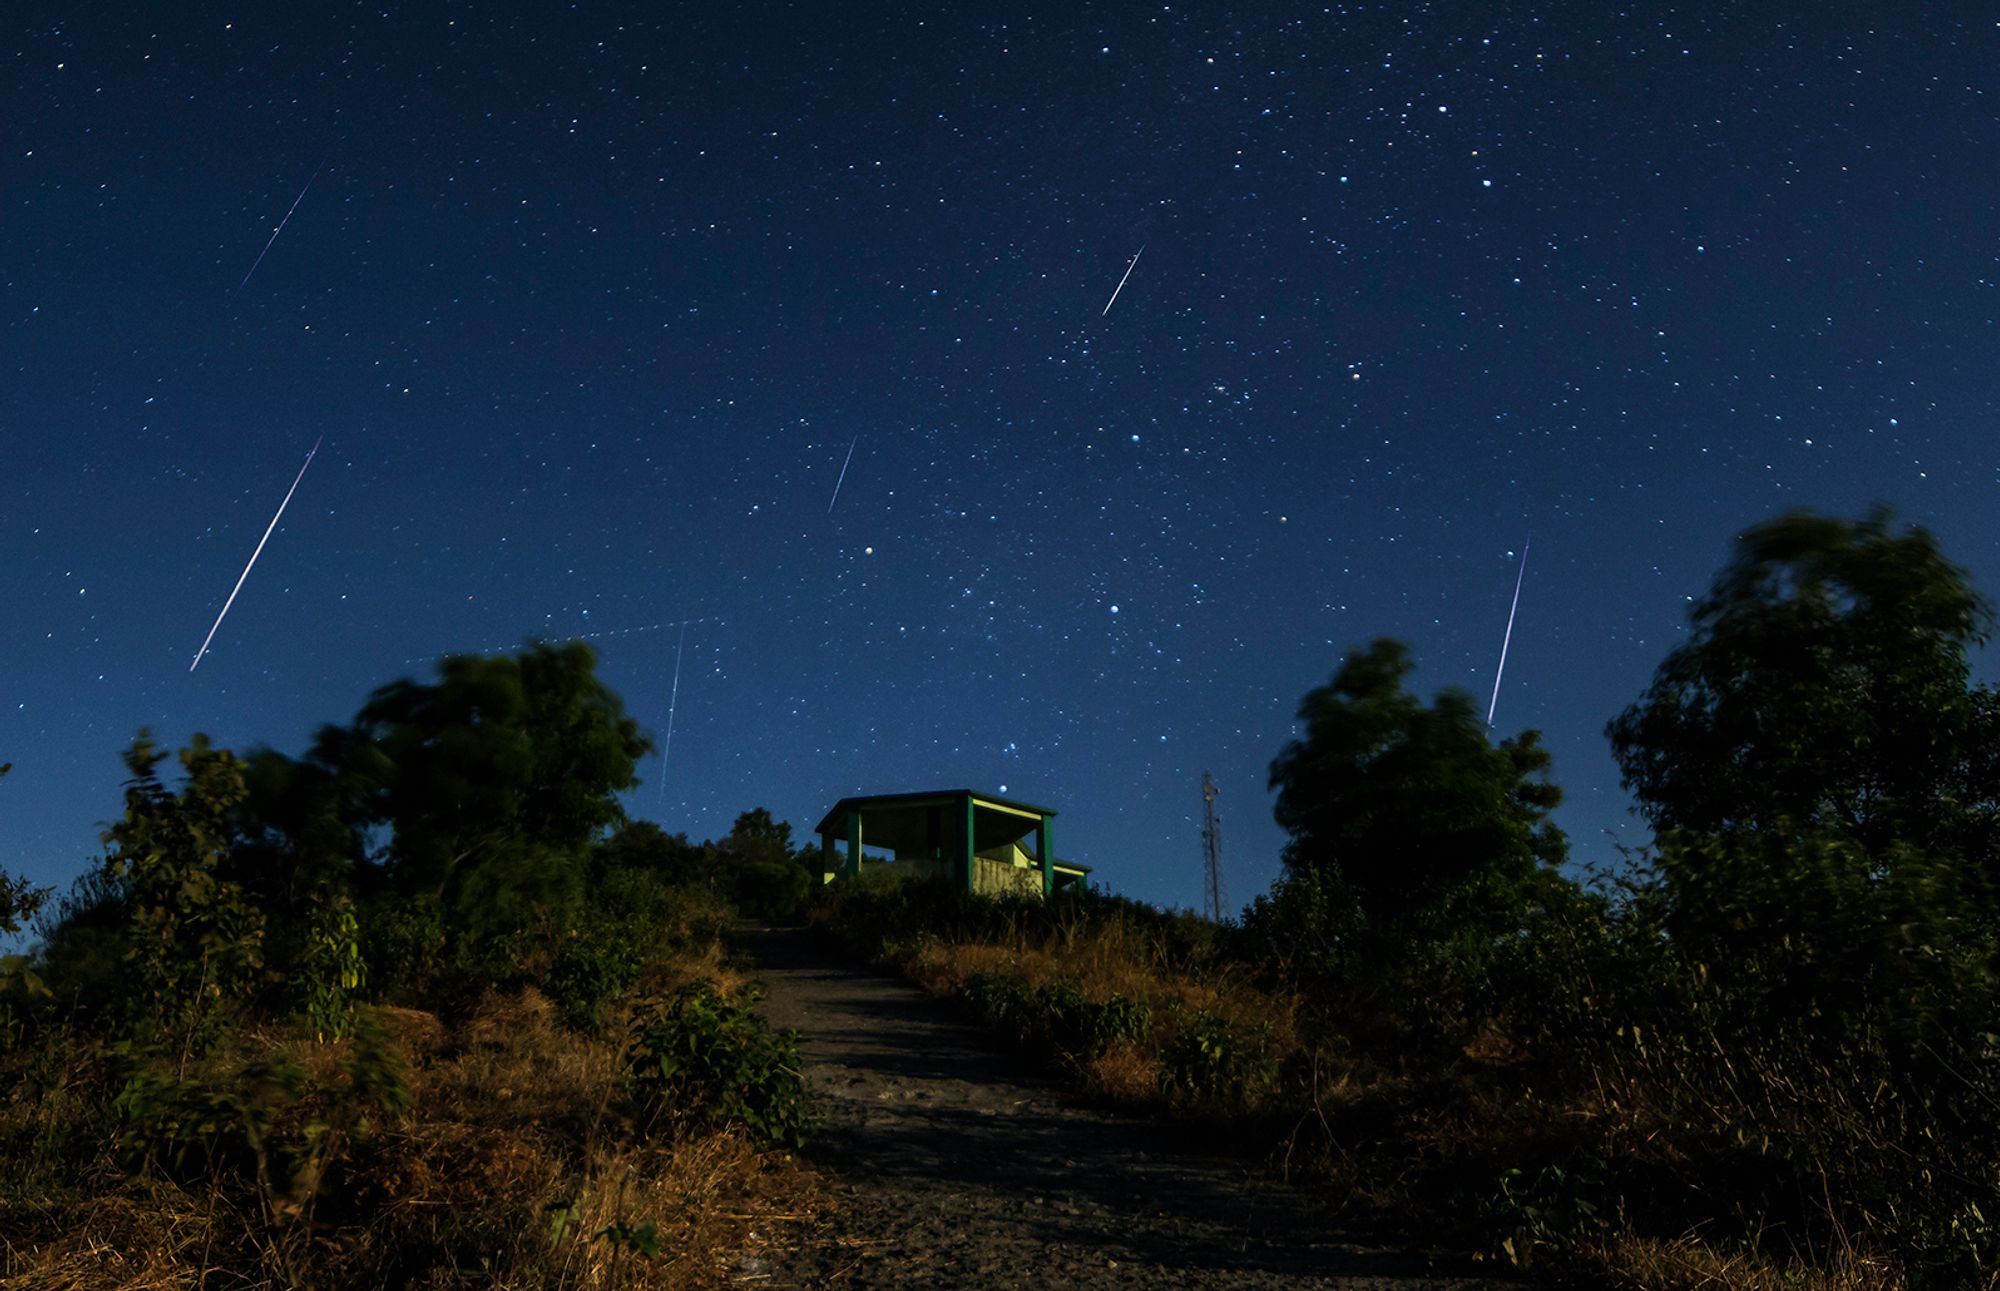 A structure on a hill is surrounded by a nigh sky full of streaking meteors.